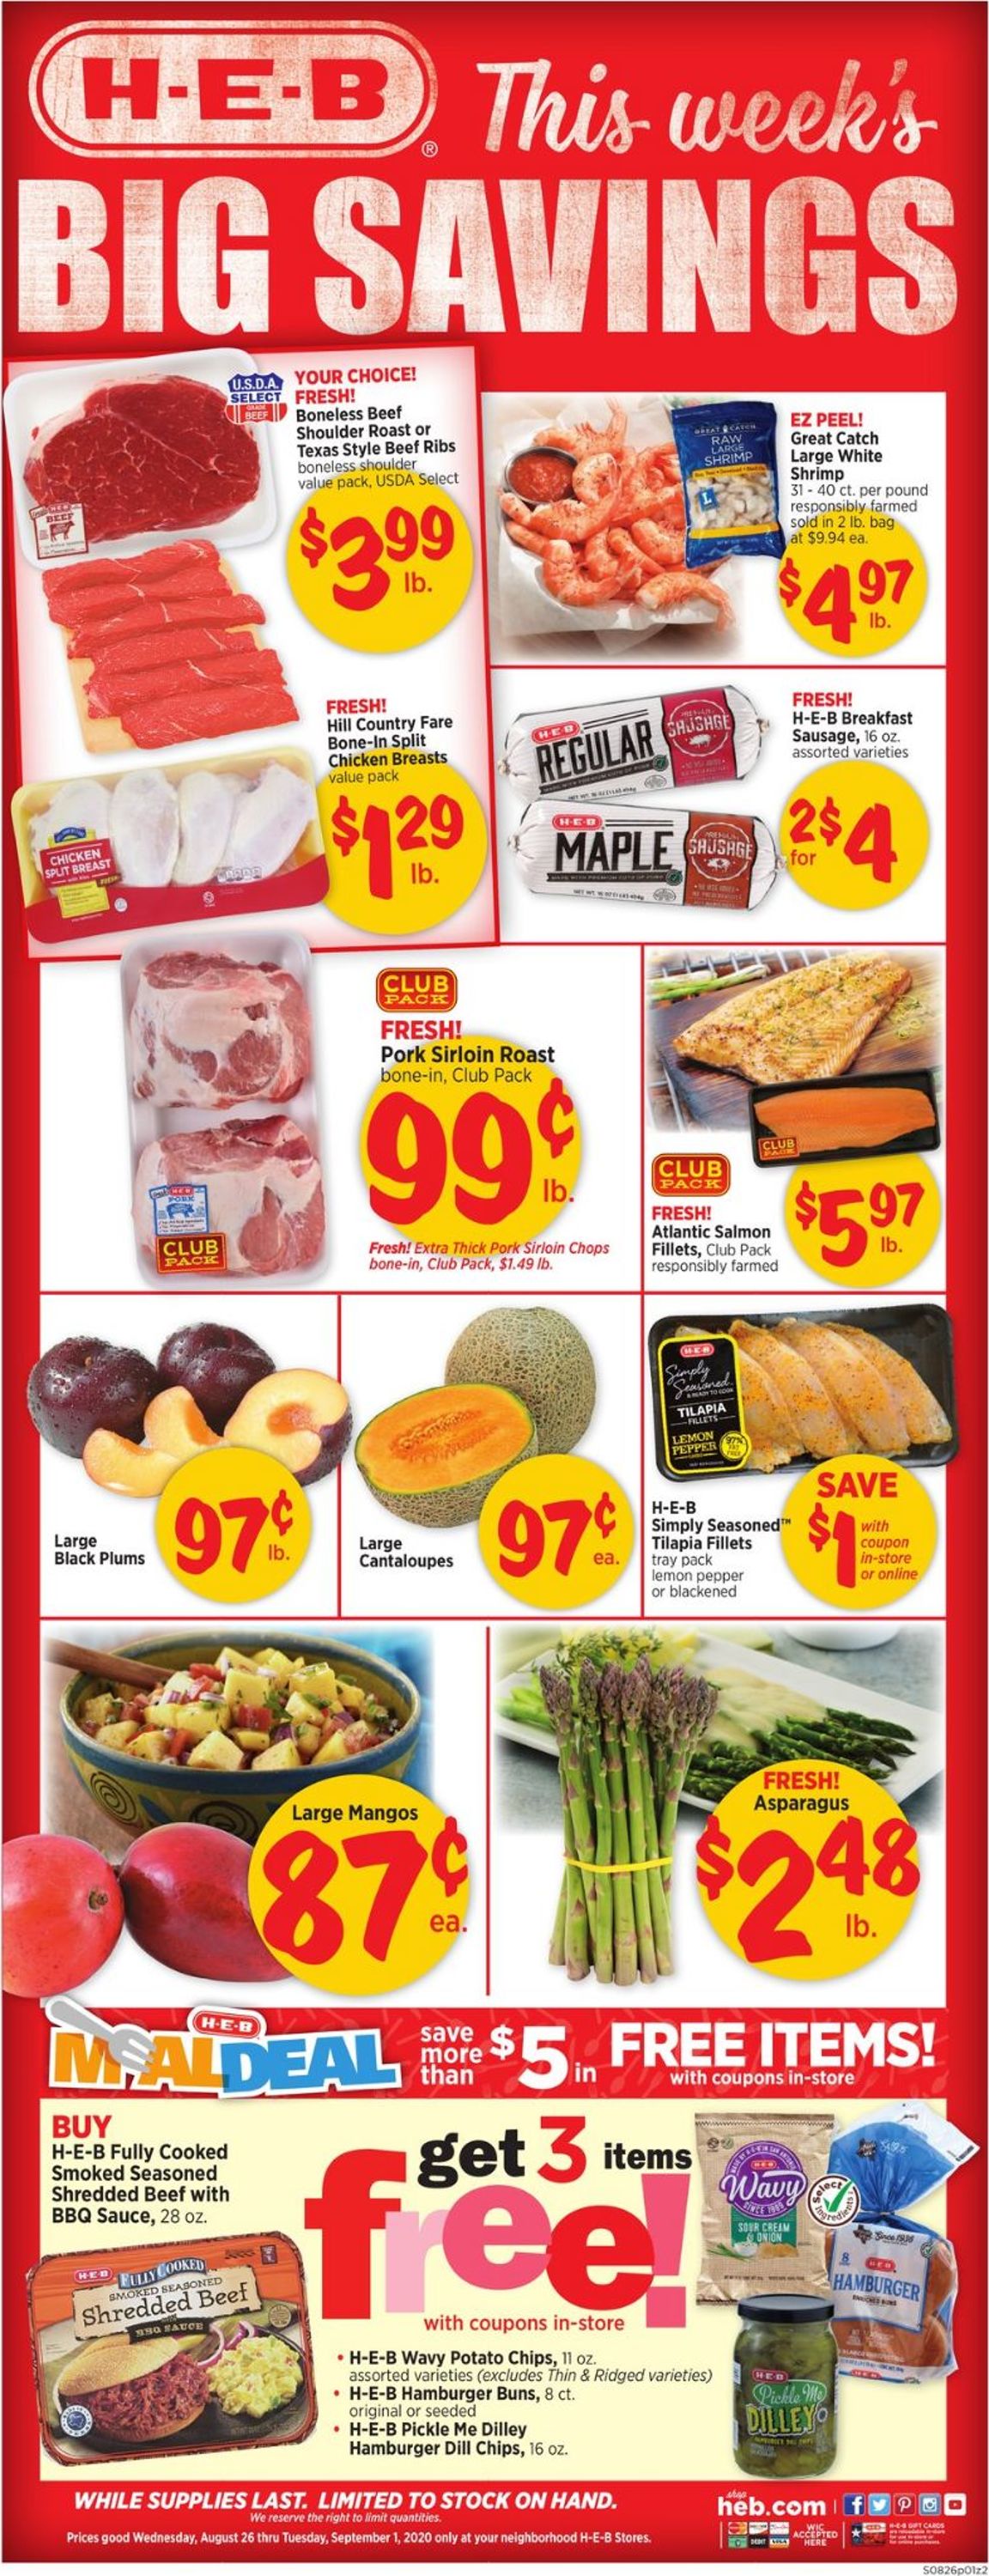 H-E-B Current weekly ad 08/26 - 09/01/2020 - frequent-ads.com